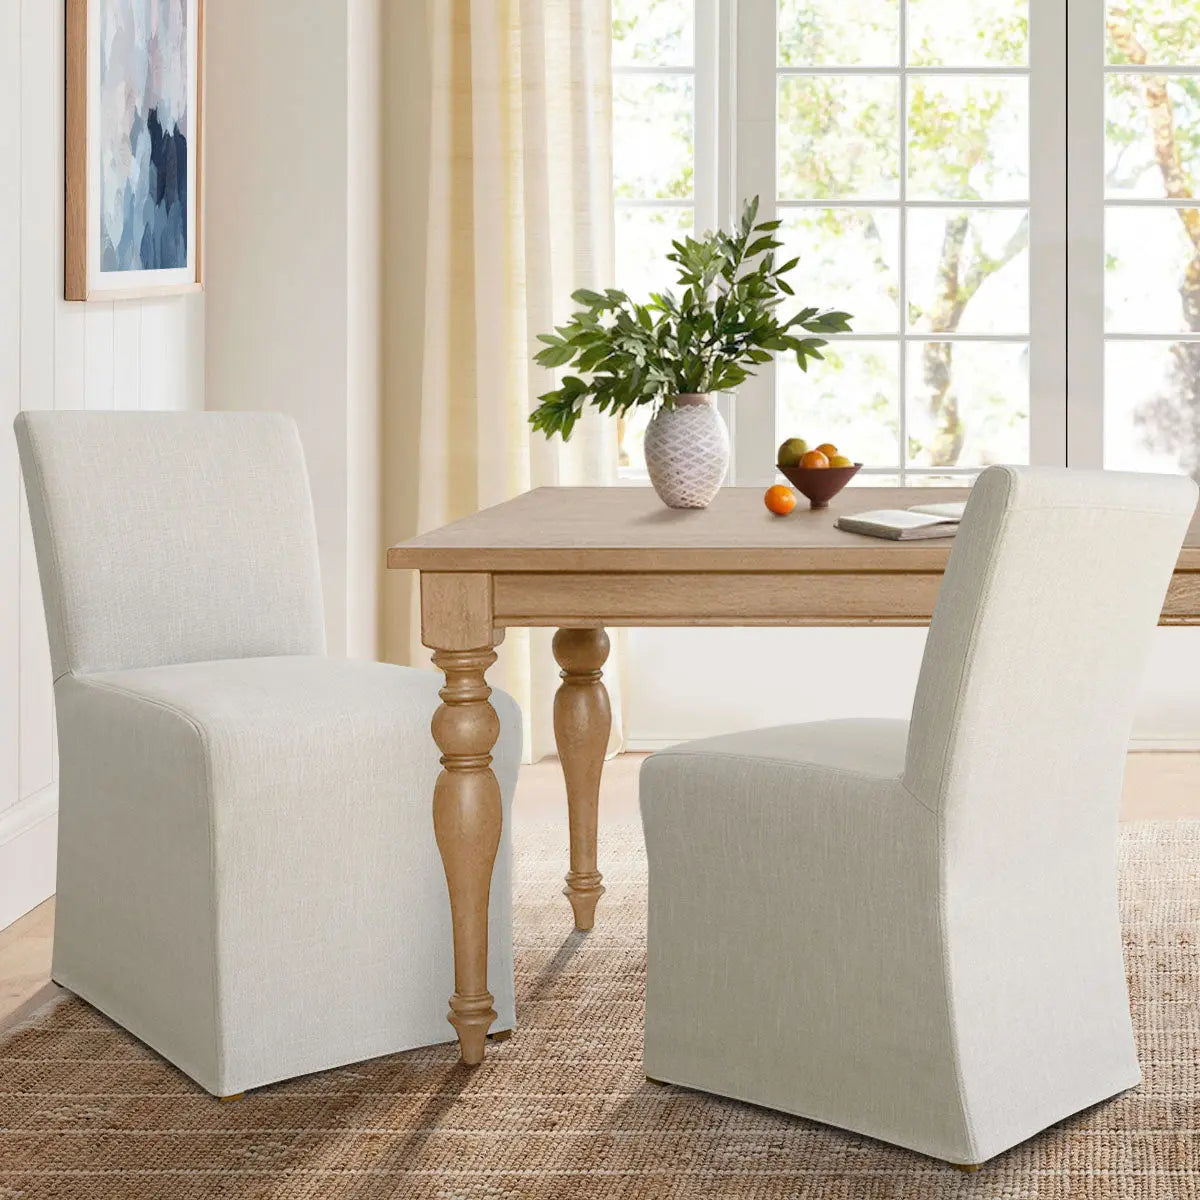 North Solid Back Side Chair, Removable Slipcover Dining Chair (Set of 2) The Pop Maison